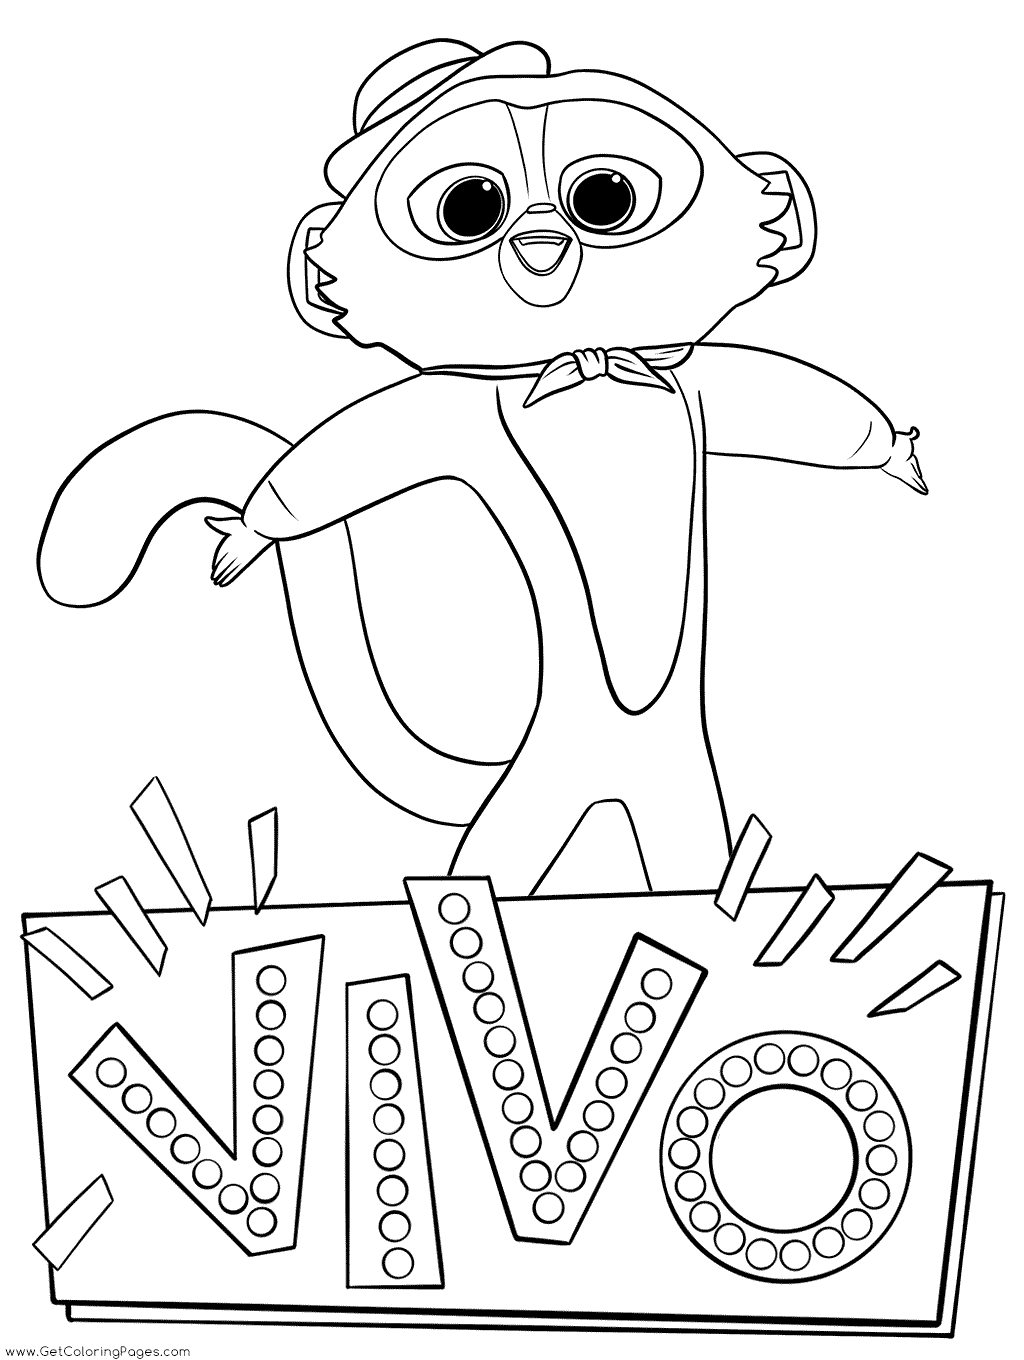 Vivo Coloring Pages - GetColoringPages.com